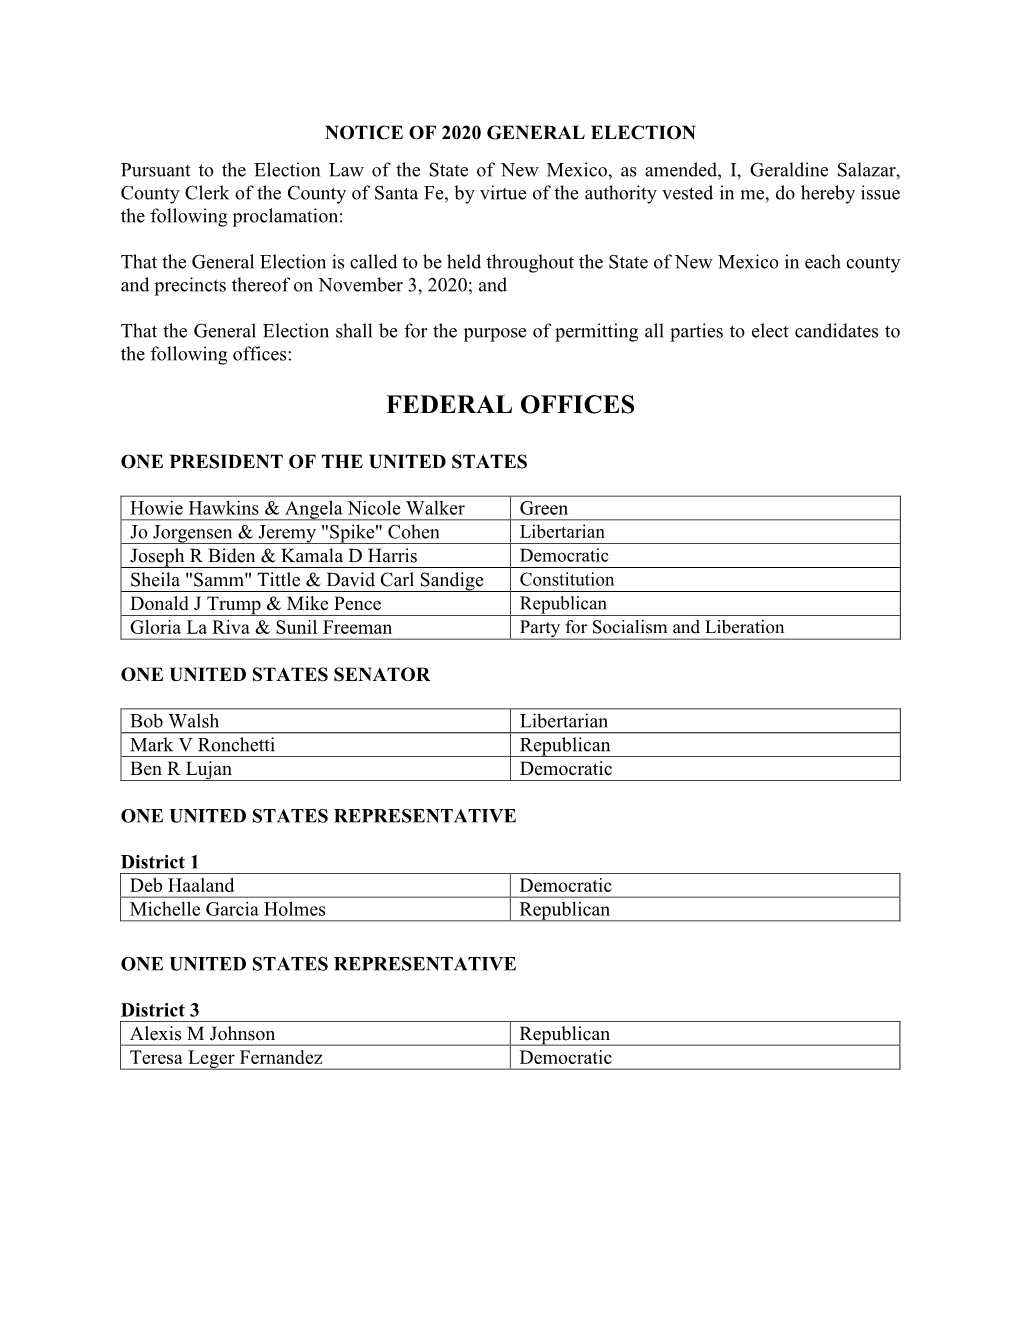 Notice of 2020 General Election